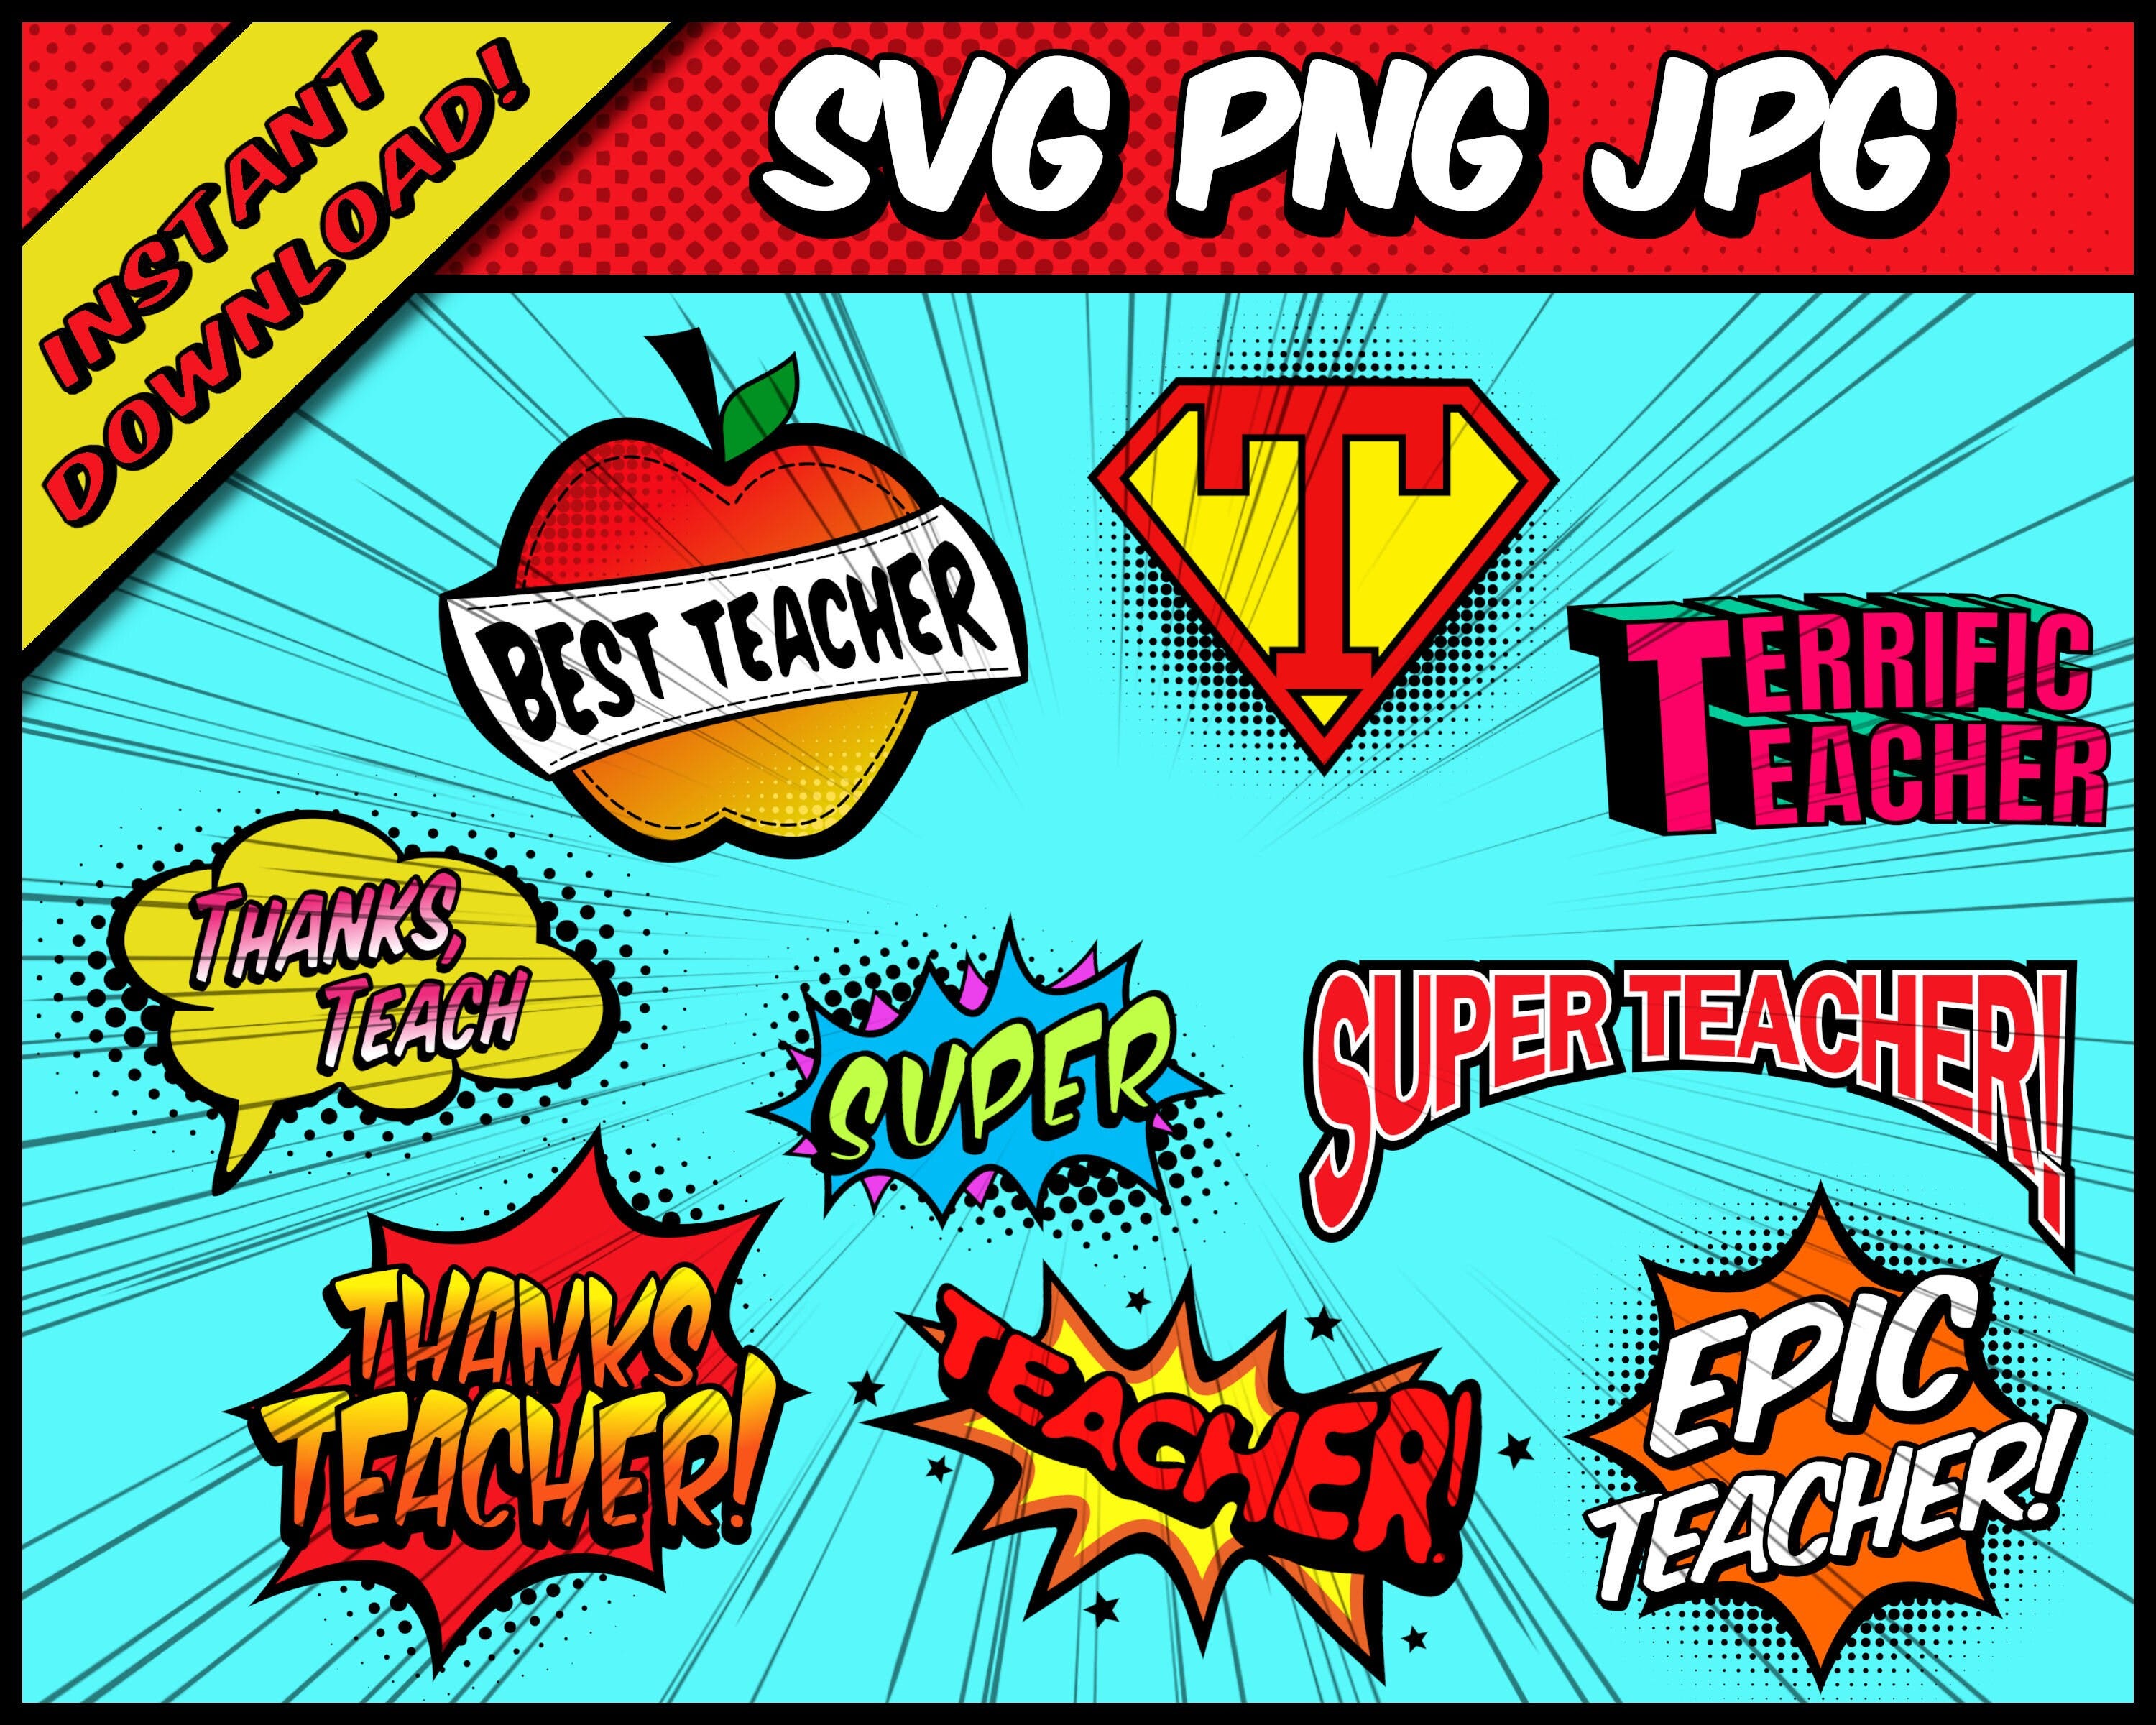 Teacher Appreciation Bundle - SVG, PNG, JPG - Digital Cut File, Instant Download, Commercial Use, Ready to Cut, File for Cricut, End of Year